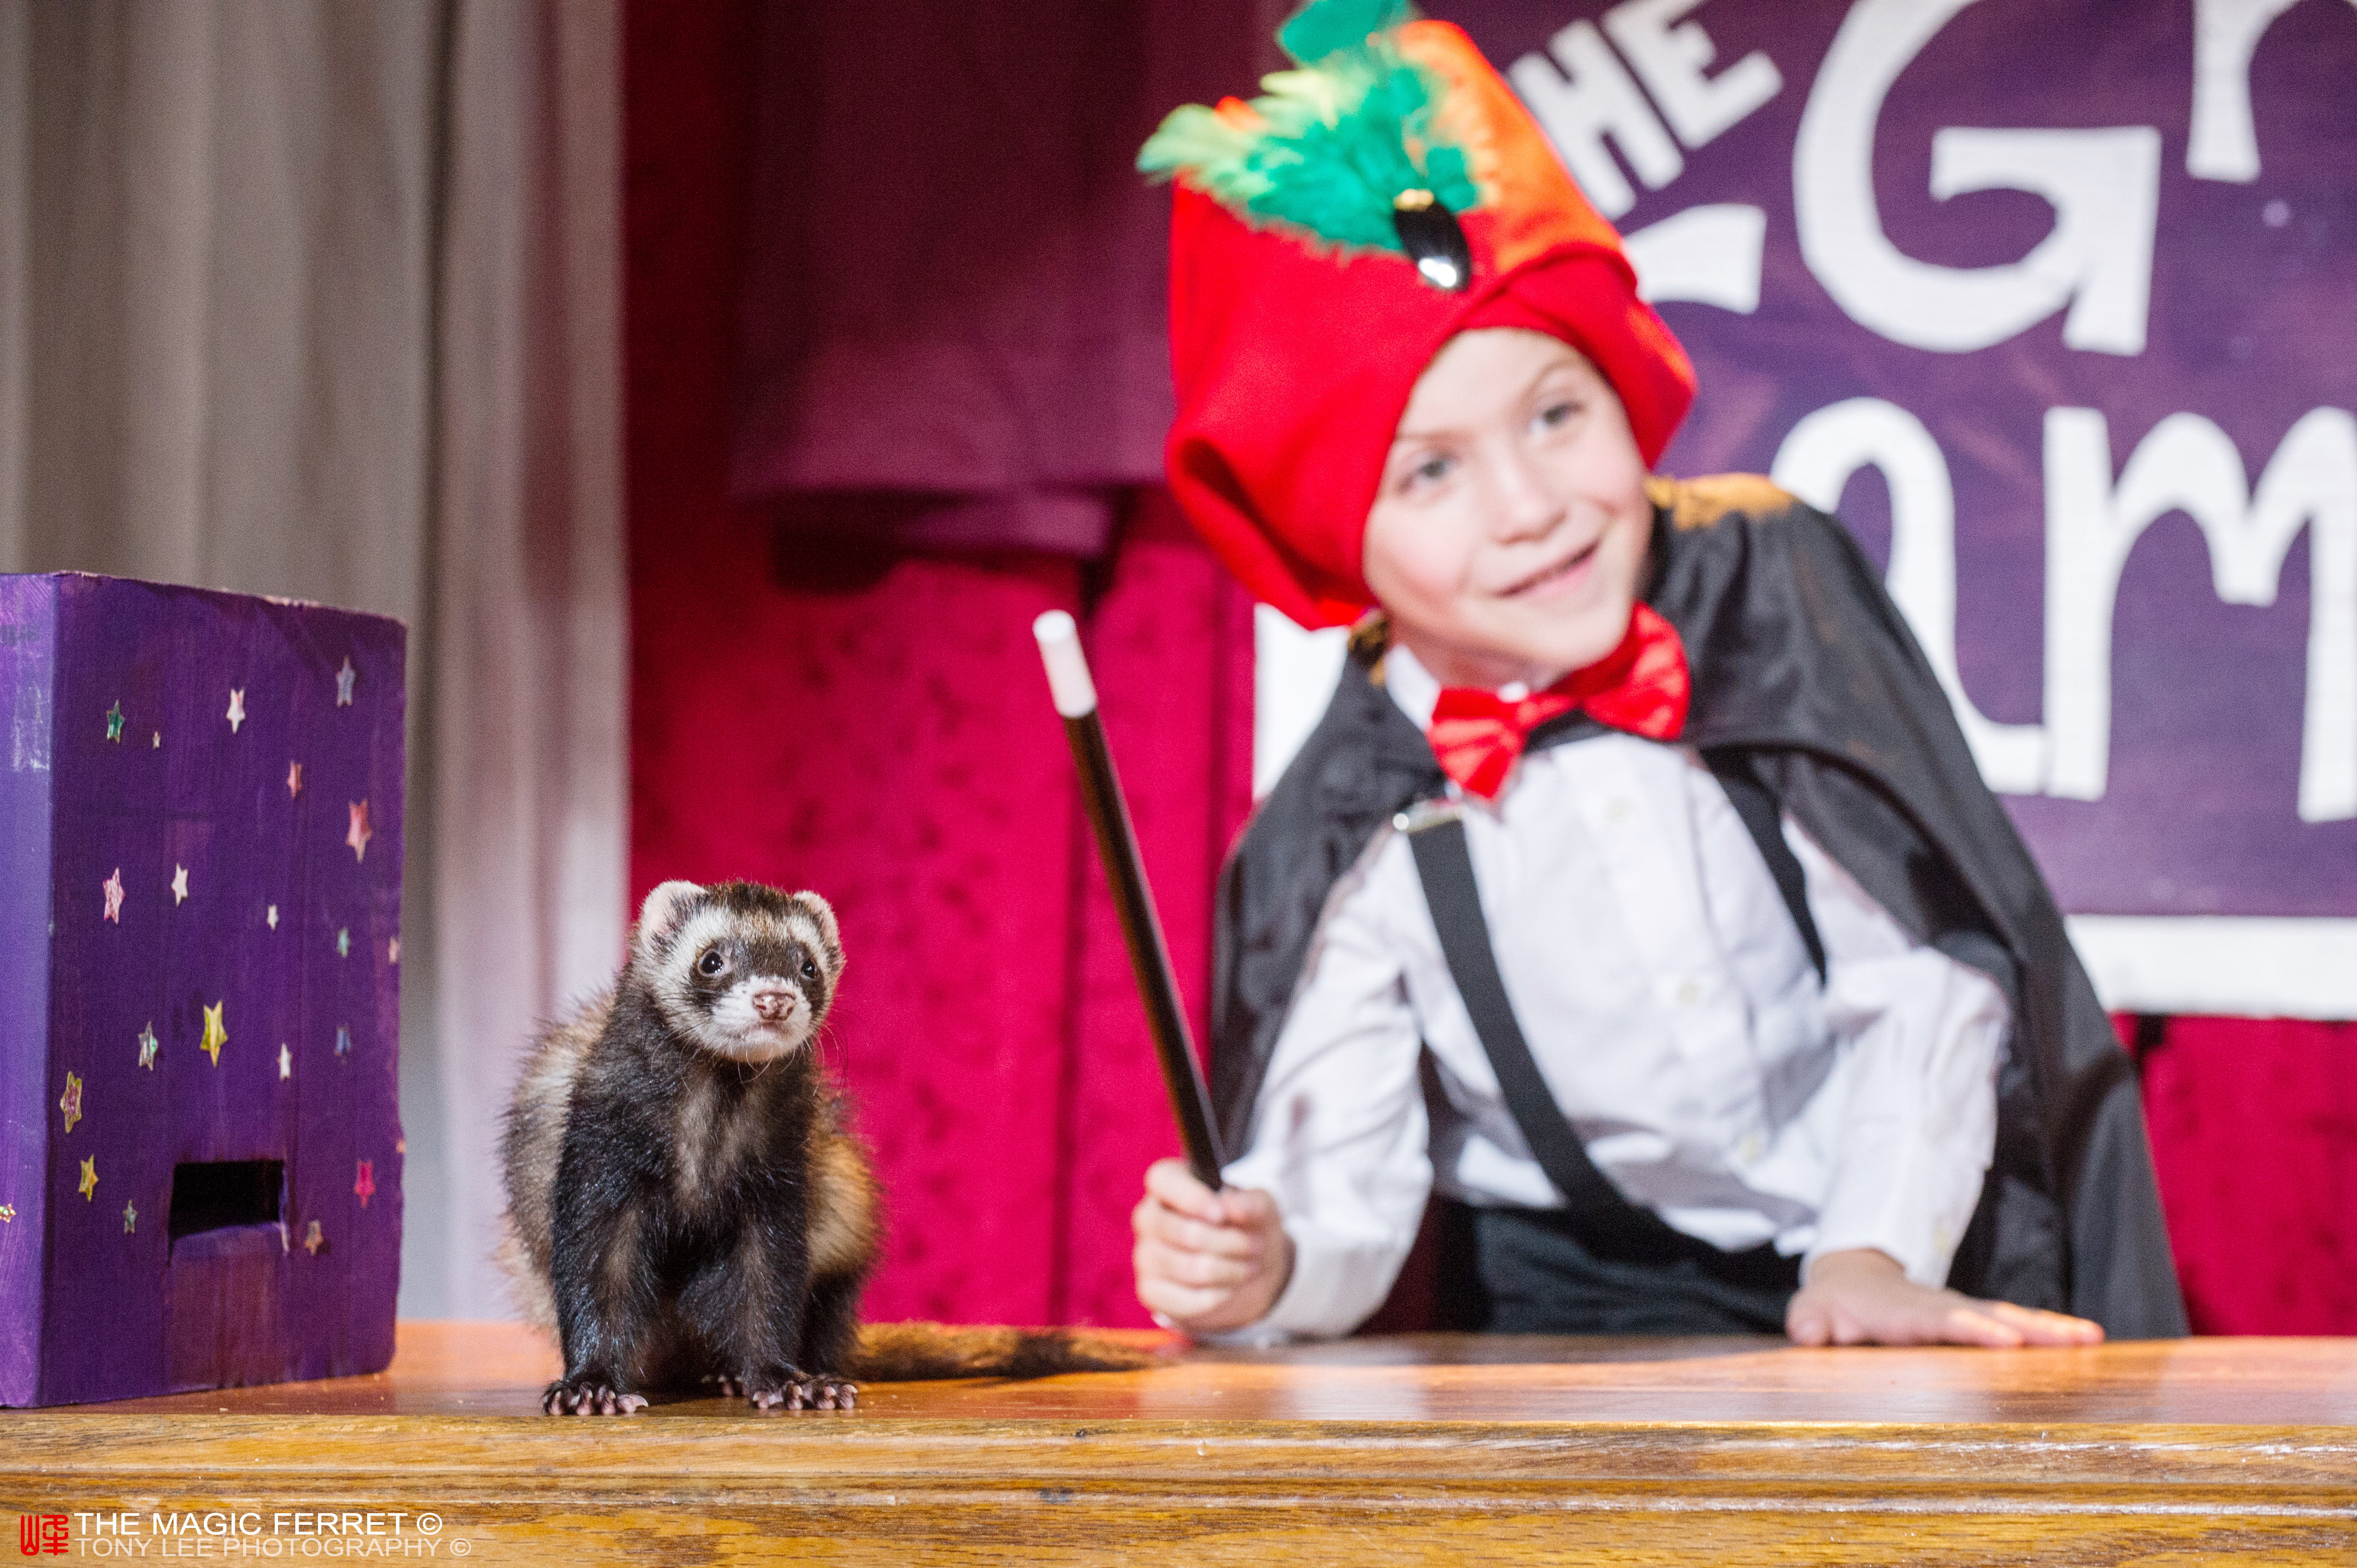 Still of Falcor the Ferret and Jacob Tremblay in The Magic Ferret.